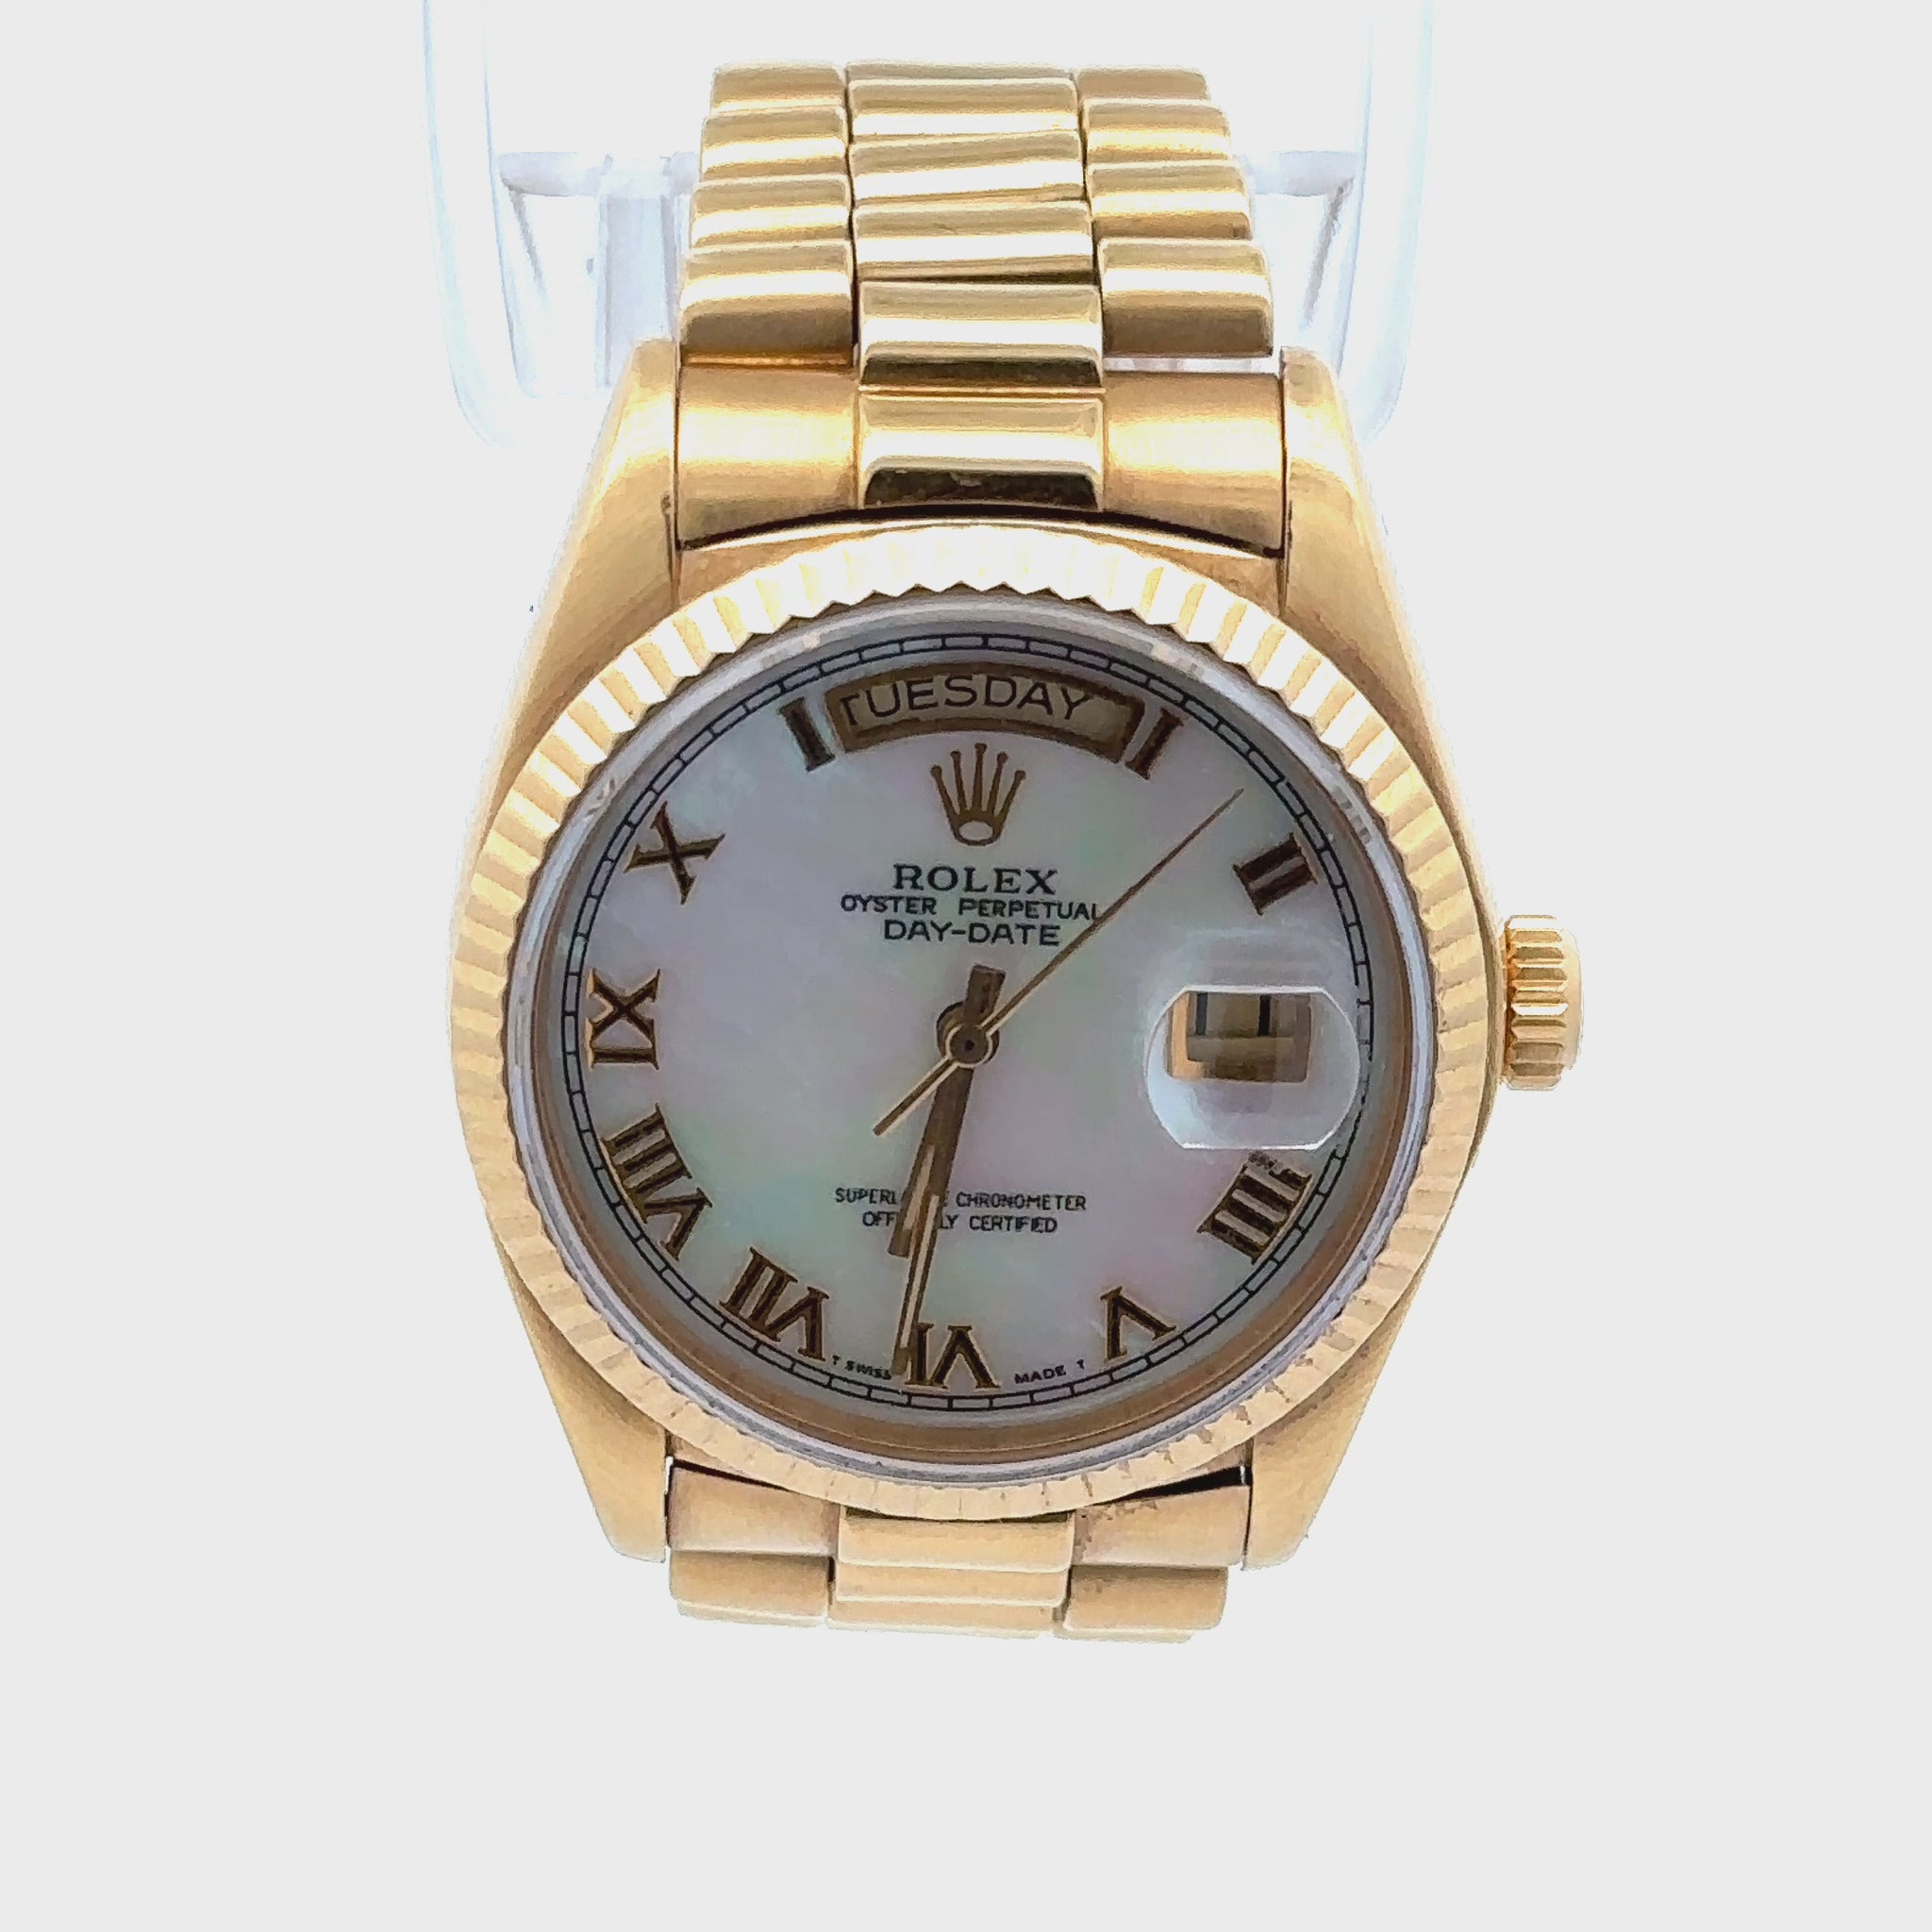 360 video of Rolex with white mother of pearl dial and 18K yellow gold case and band. The day of the week is on top of the dial by the 12 and the date is on the window on the side.